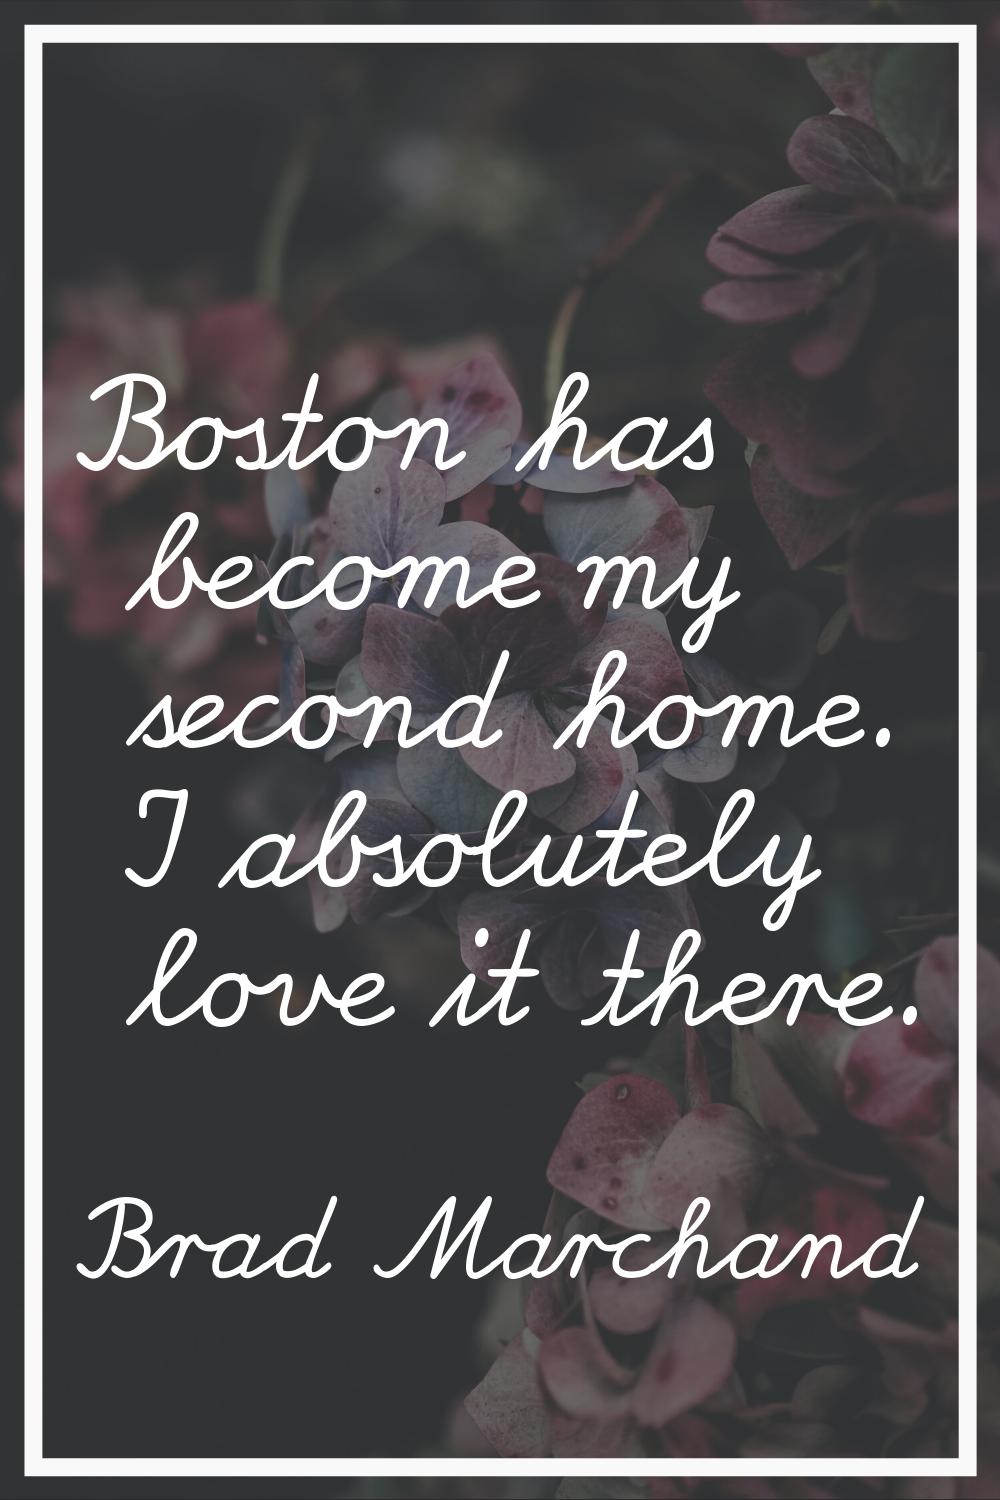 Boston has become my second home. I absolutely love it there.